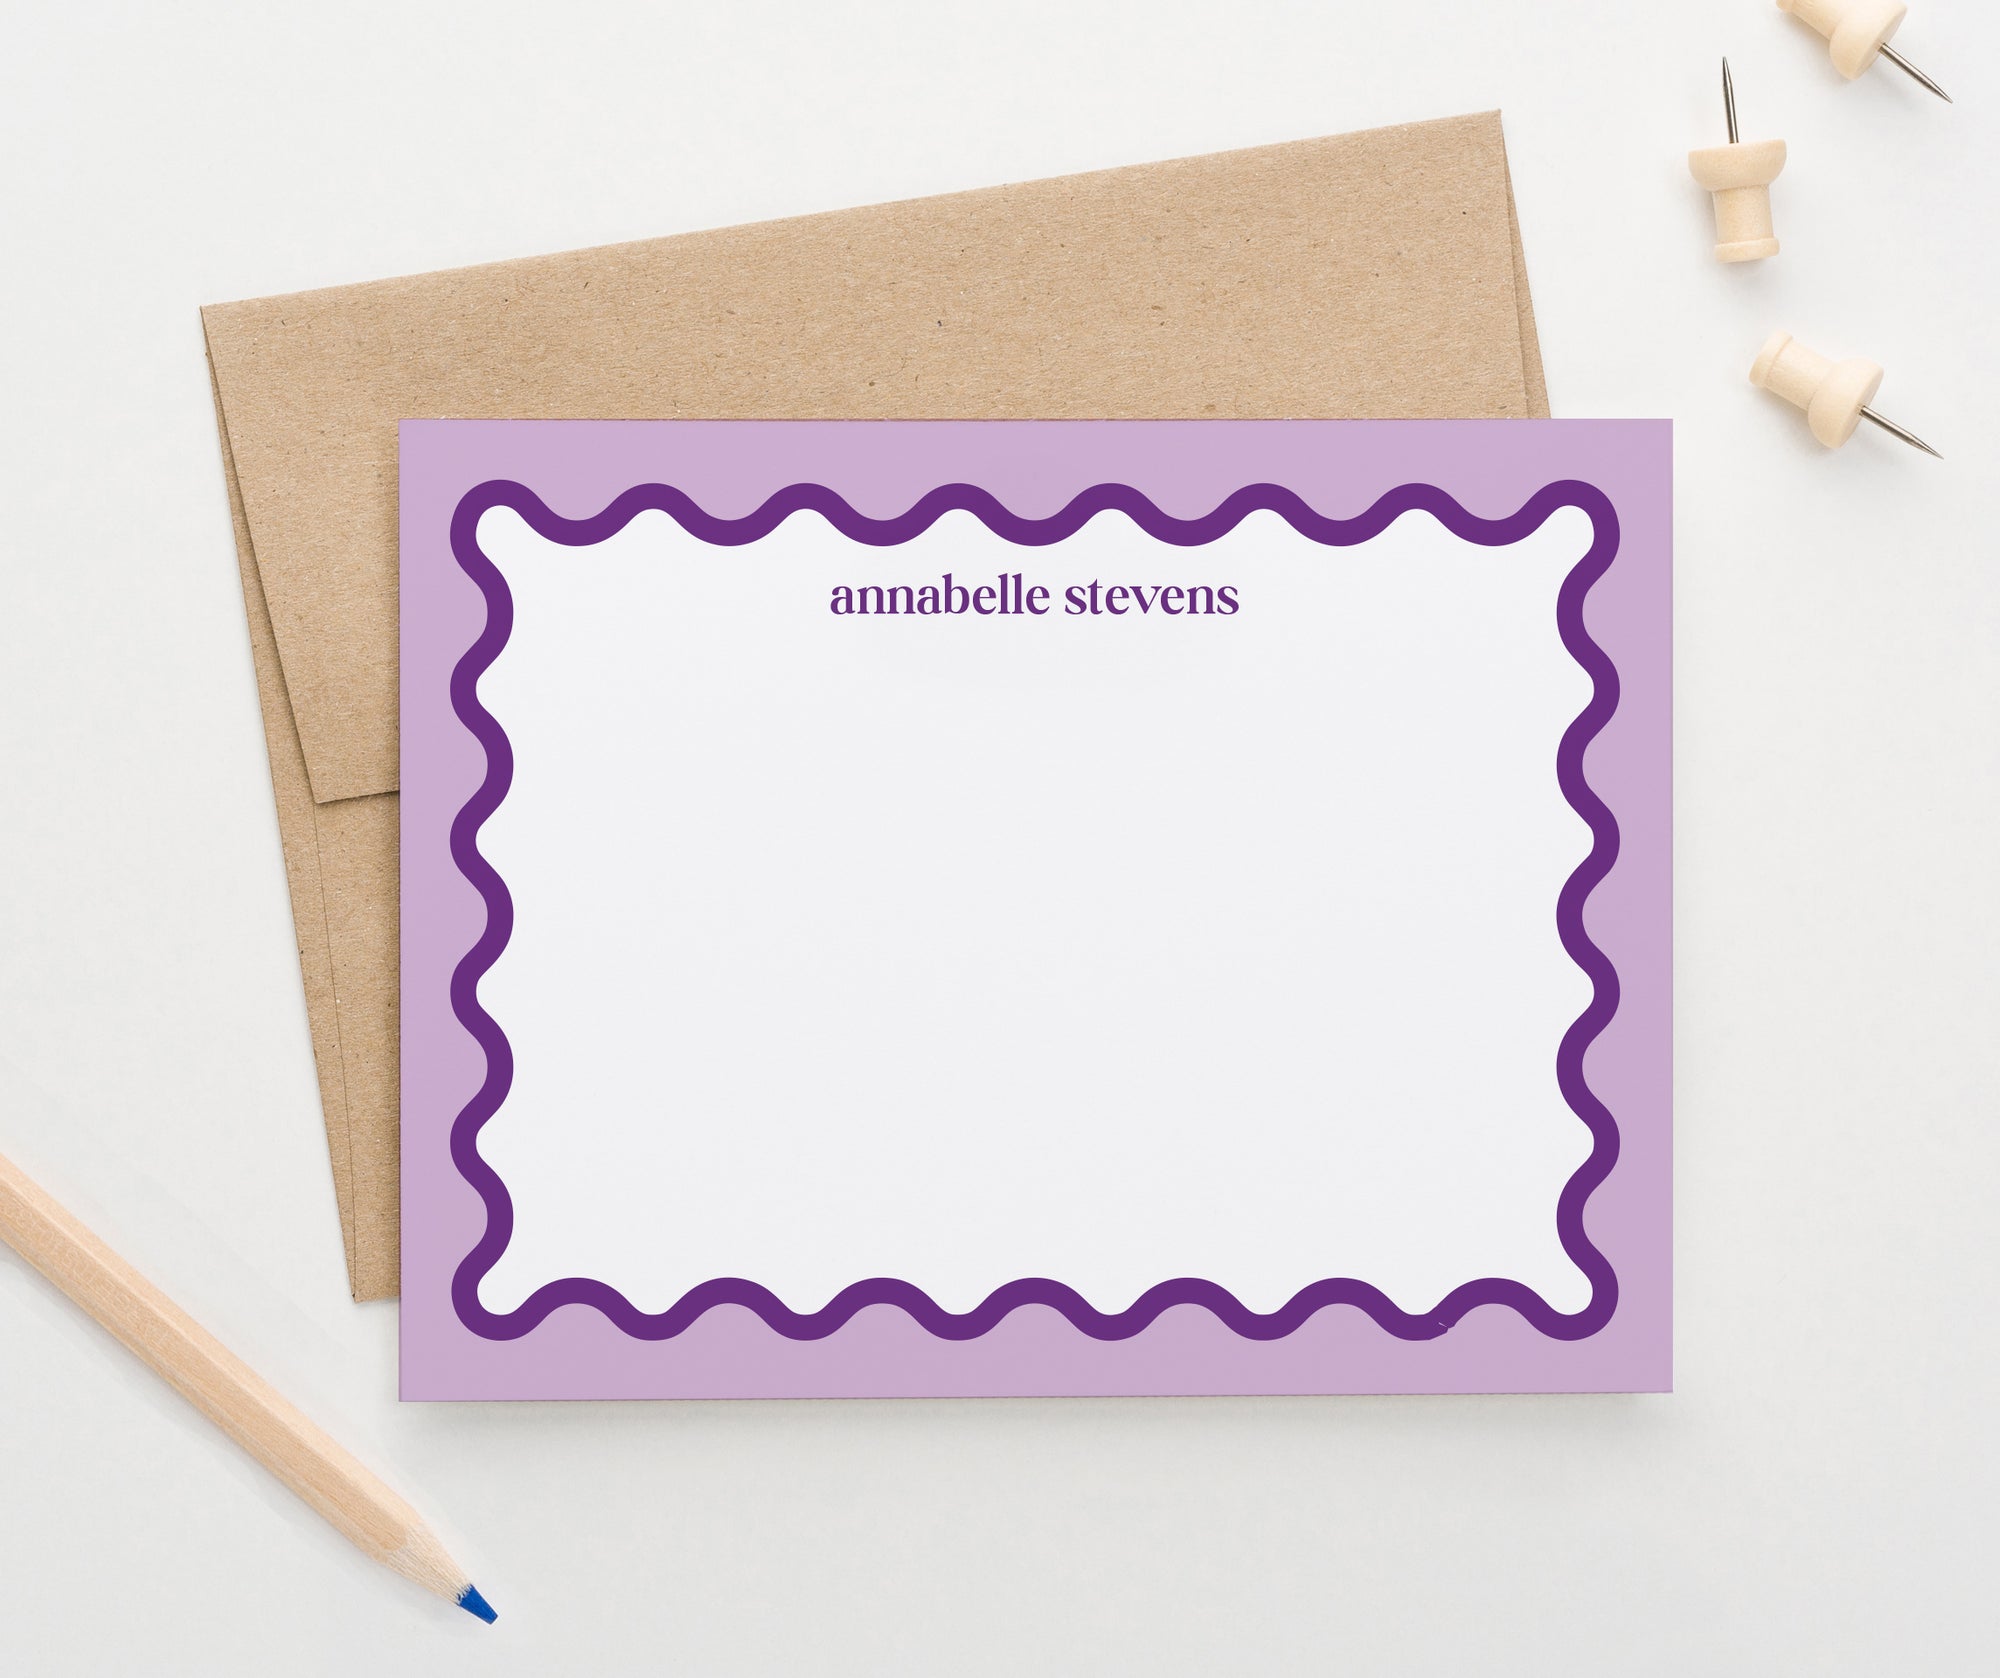 Fun Wavy Border Custom Stationery Note Cards With Name